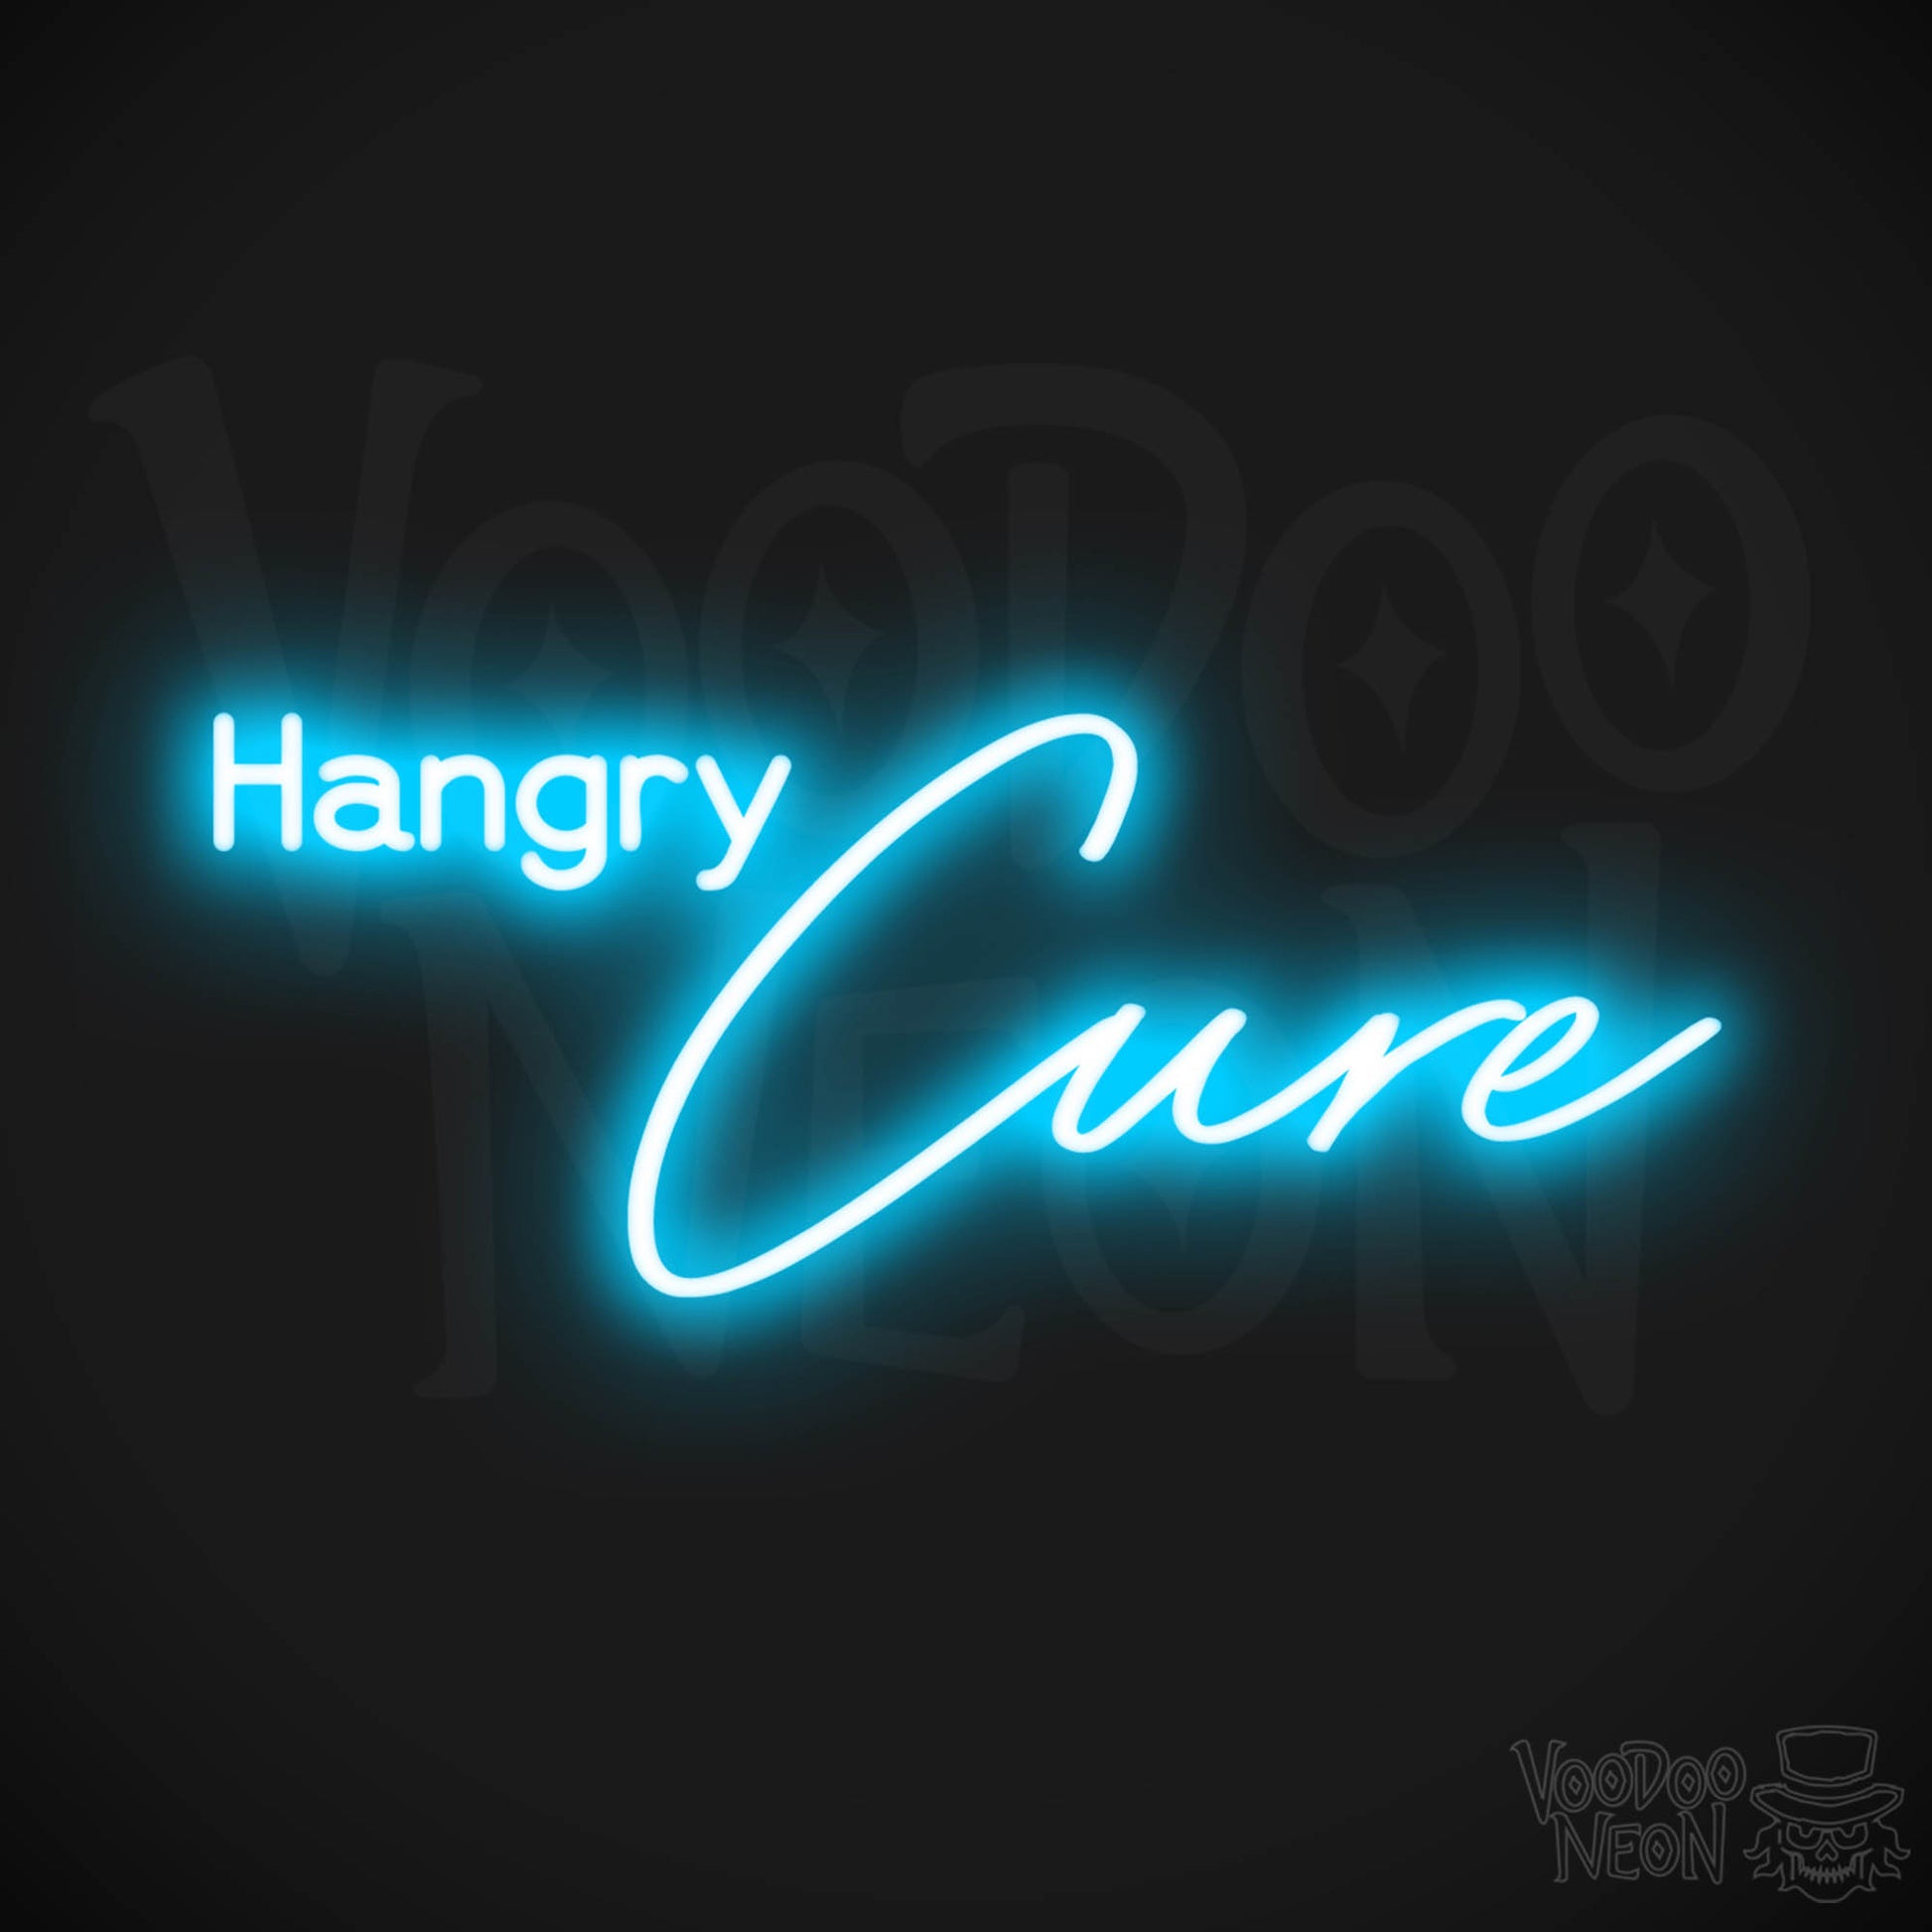 Hangry Cure LED Neon - Dark Blue